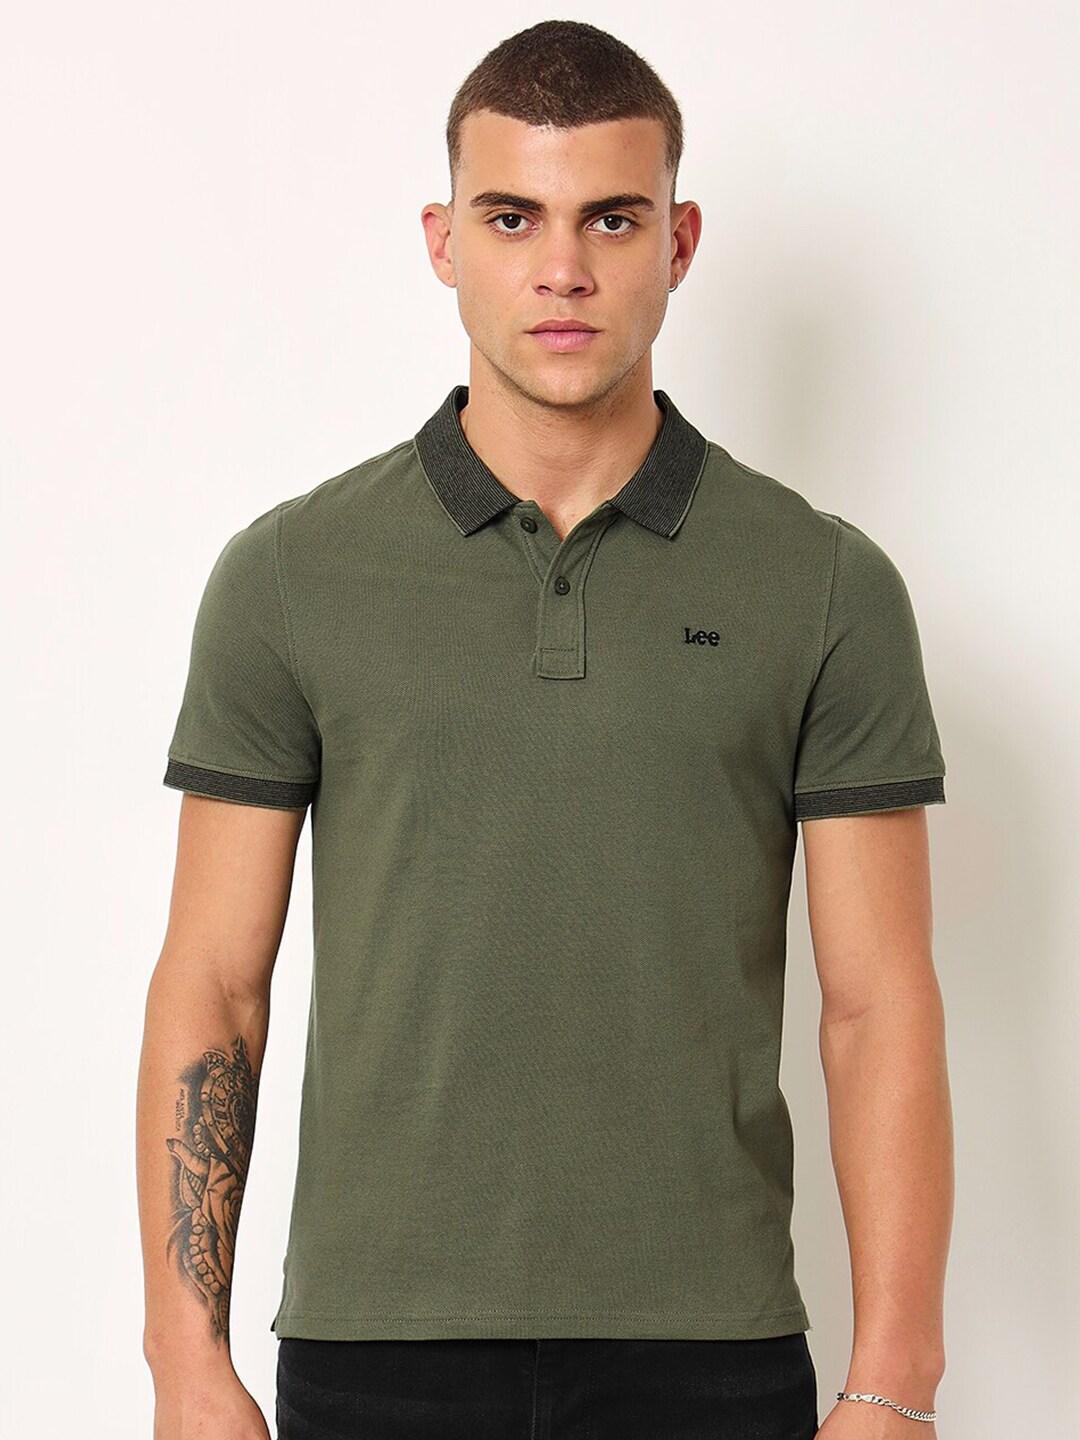 lee-polo-collar-pure-cotton-slim-fit-t-shirt